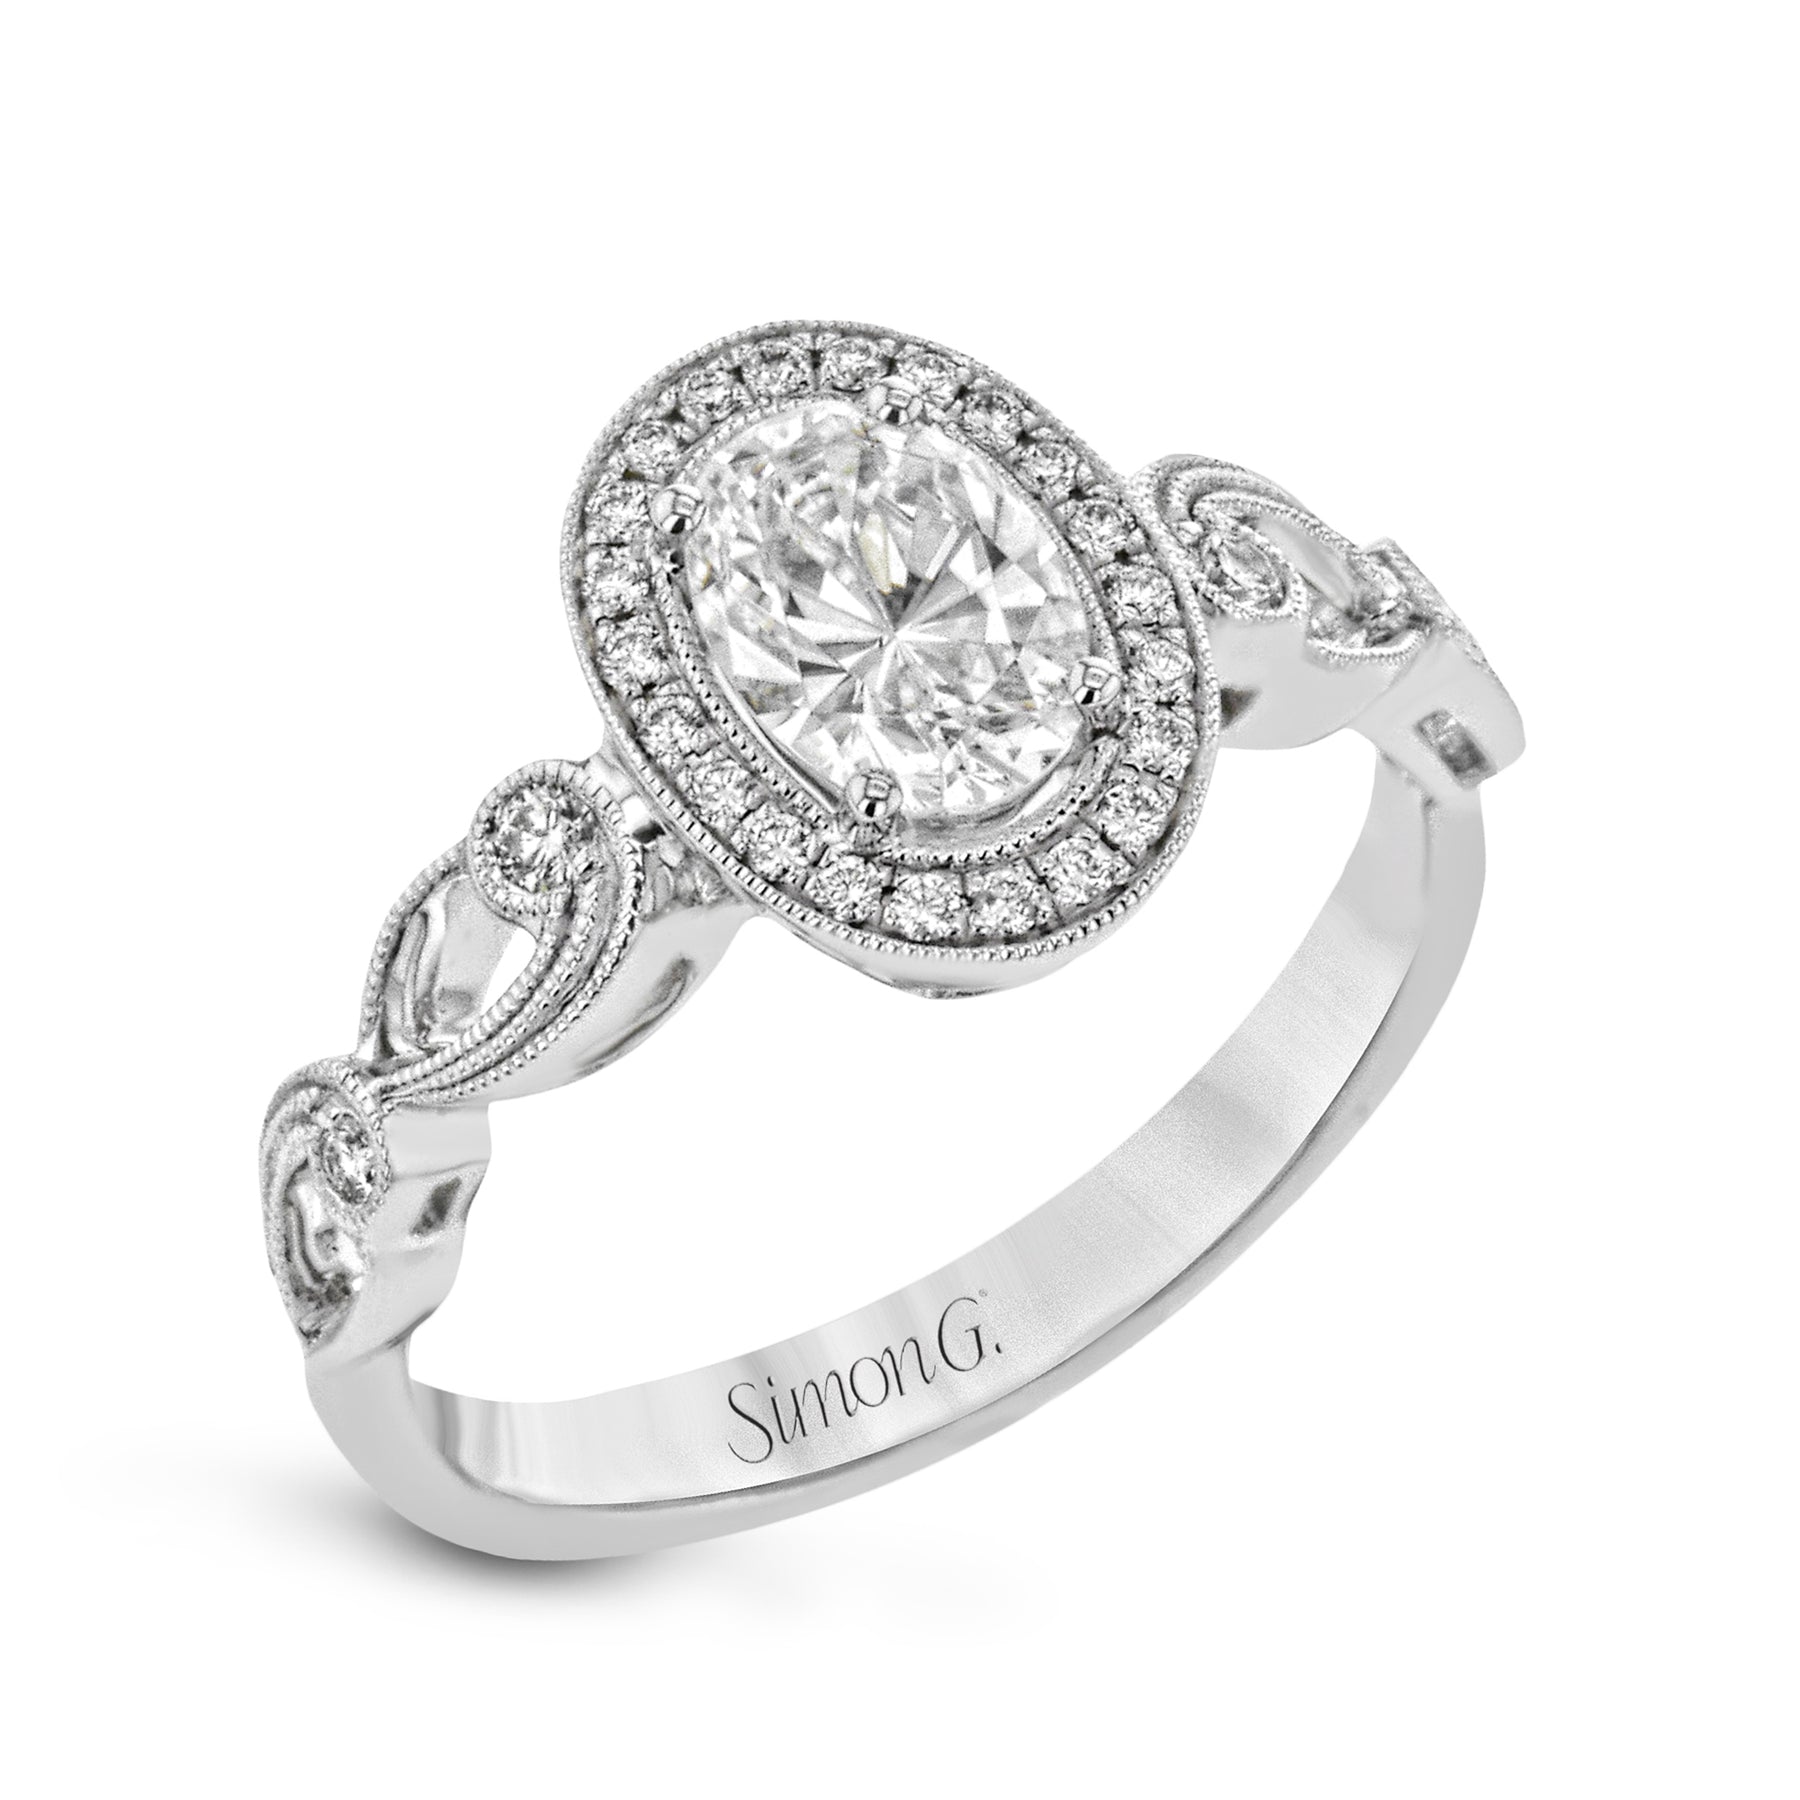 Oval-Cut Halo Engagement Ring In 18k Gold With Diamonds TR526-OV